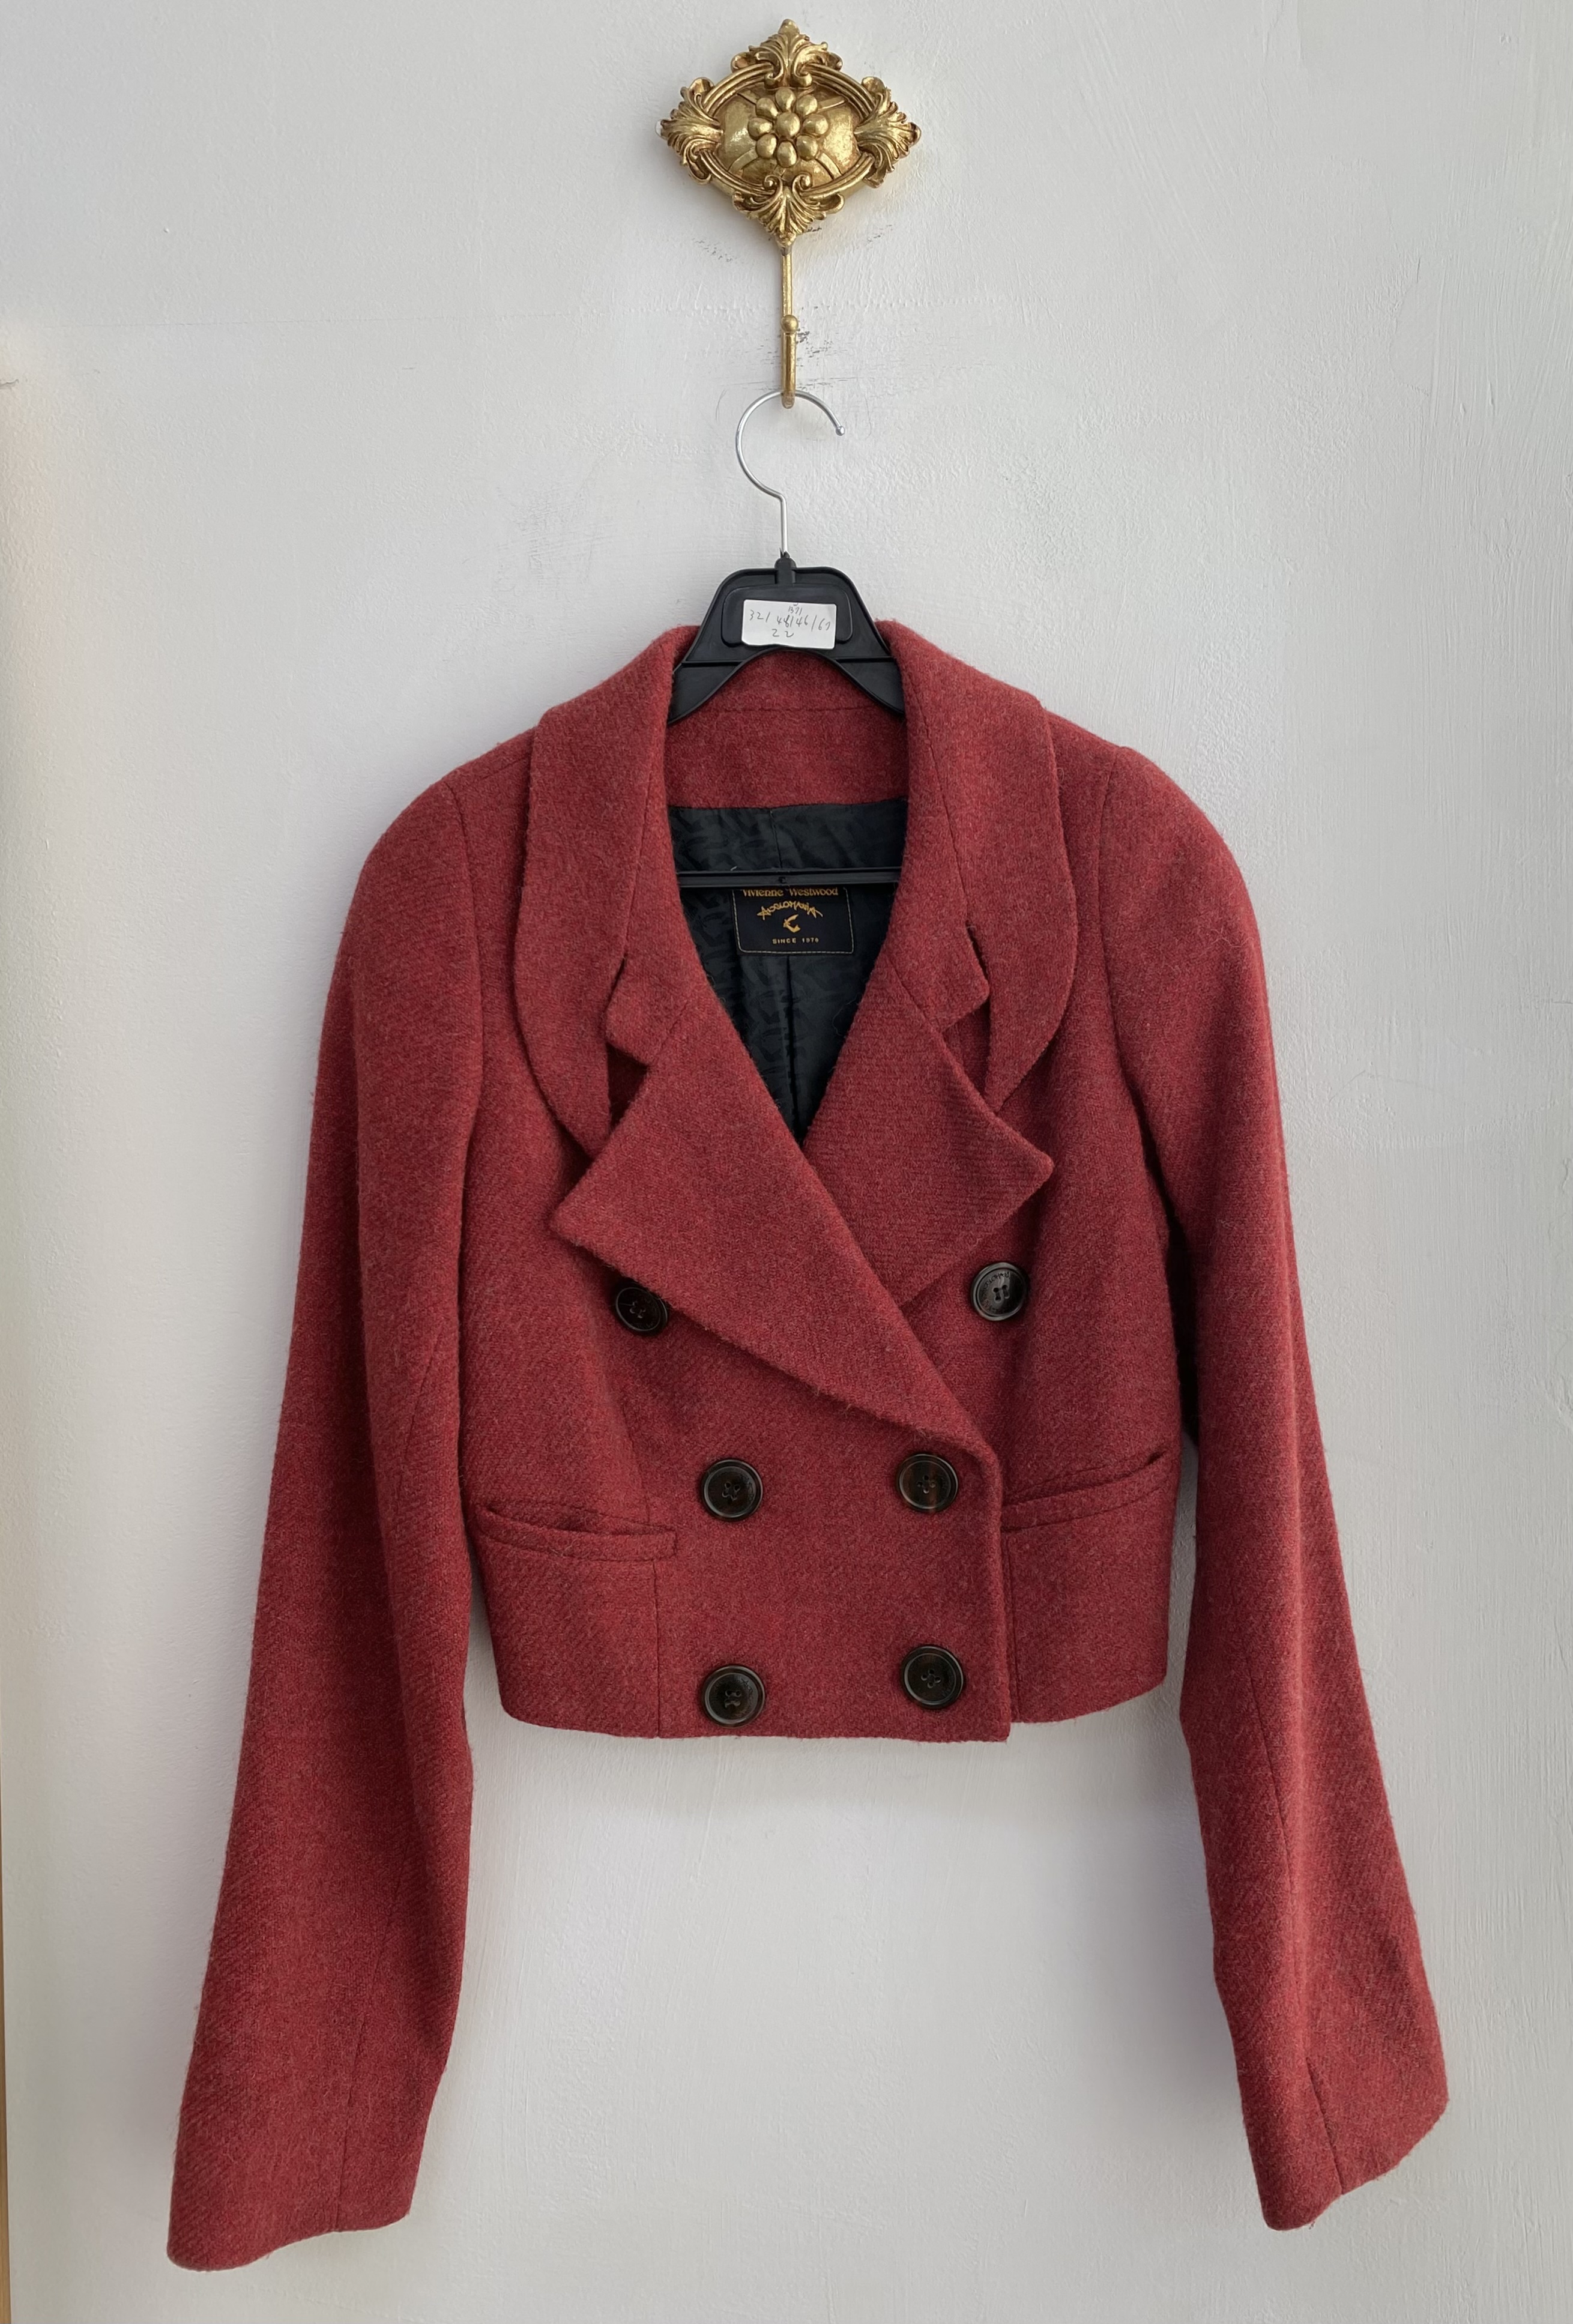 Vivienne Westwood red double short jacket (made in slovakia)